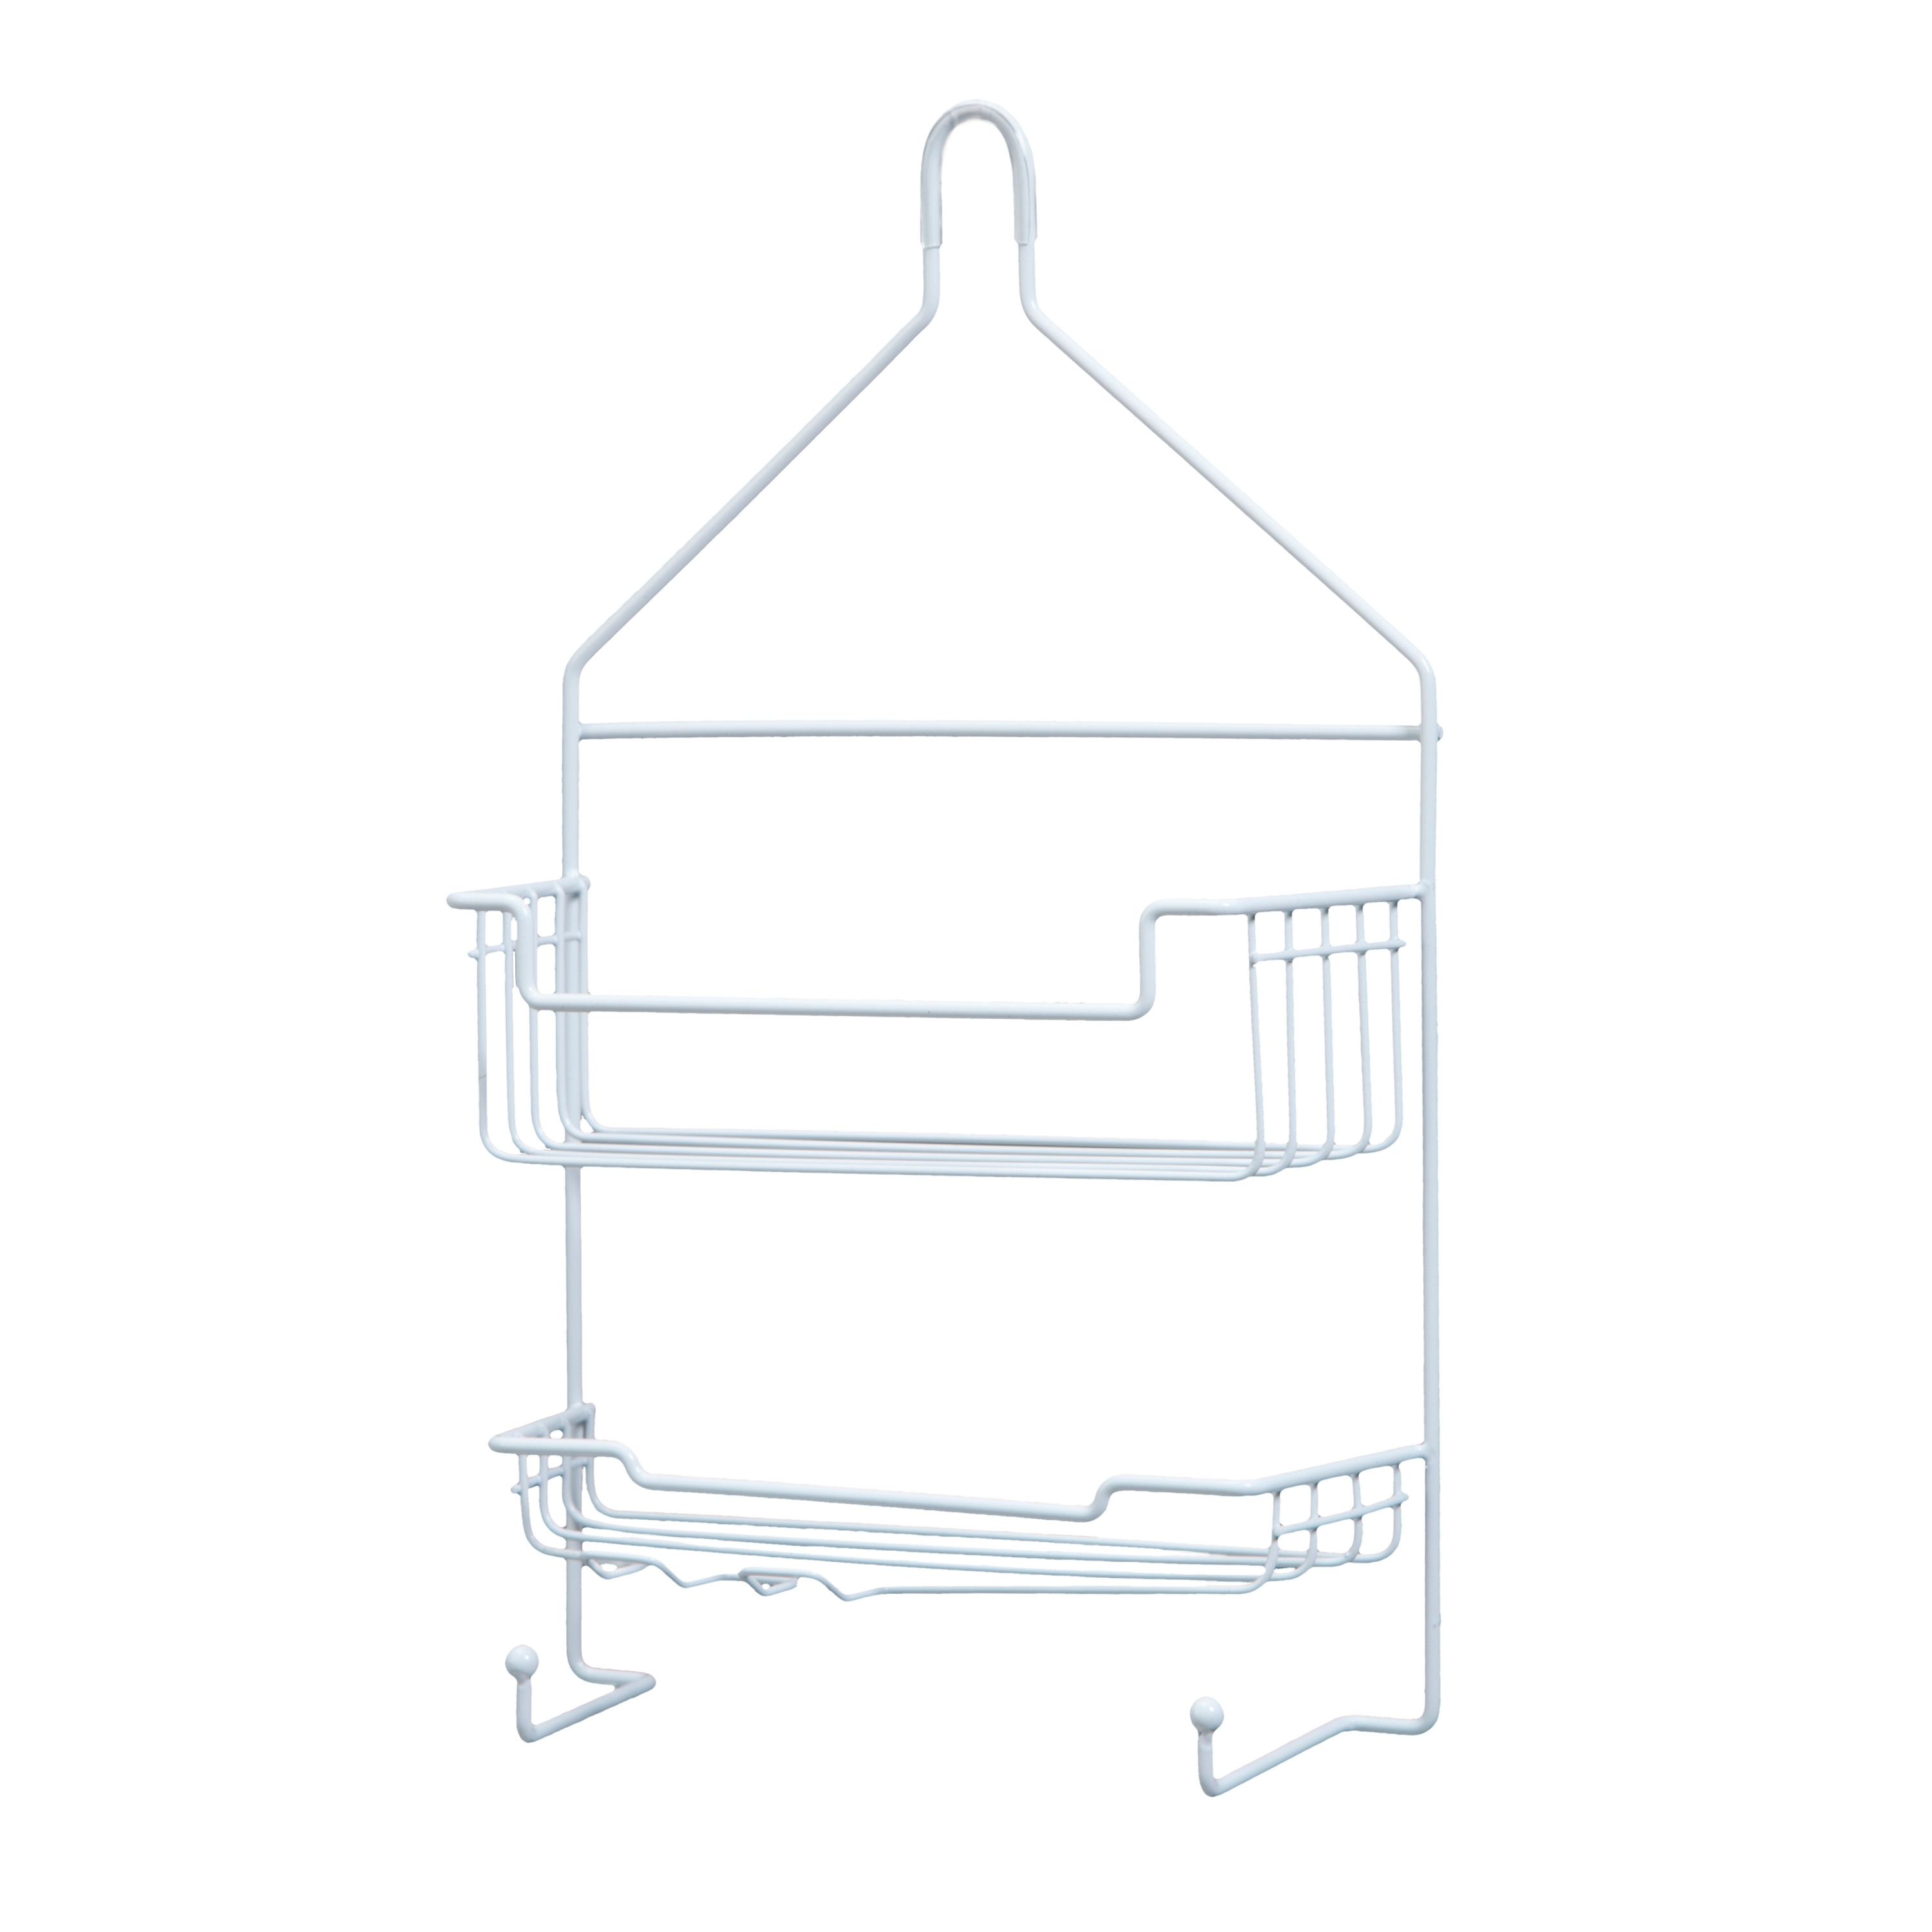 https://ak1.ostkcdn.com/images/products/is/images/direct/134b35c360ffe0e7546209c4a13d400039dcfbf8/Kenney-Rust-Resistant-2-Tier-Small-Hanging-Shower-Caddy.jpg